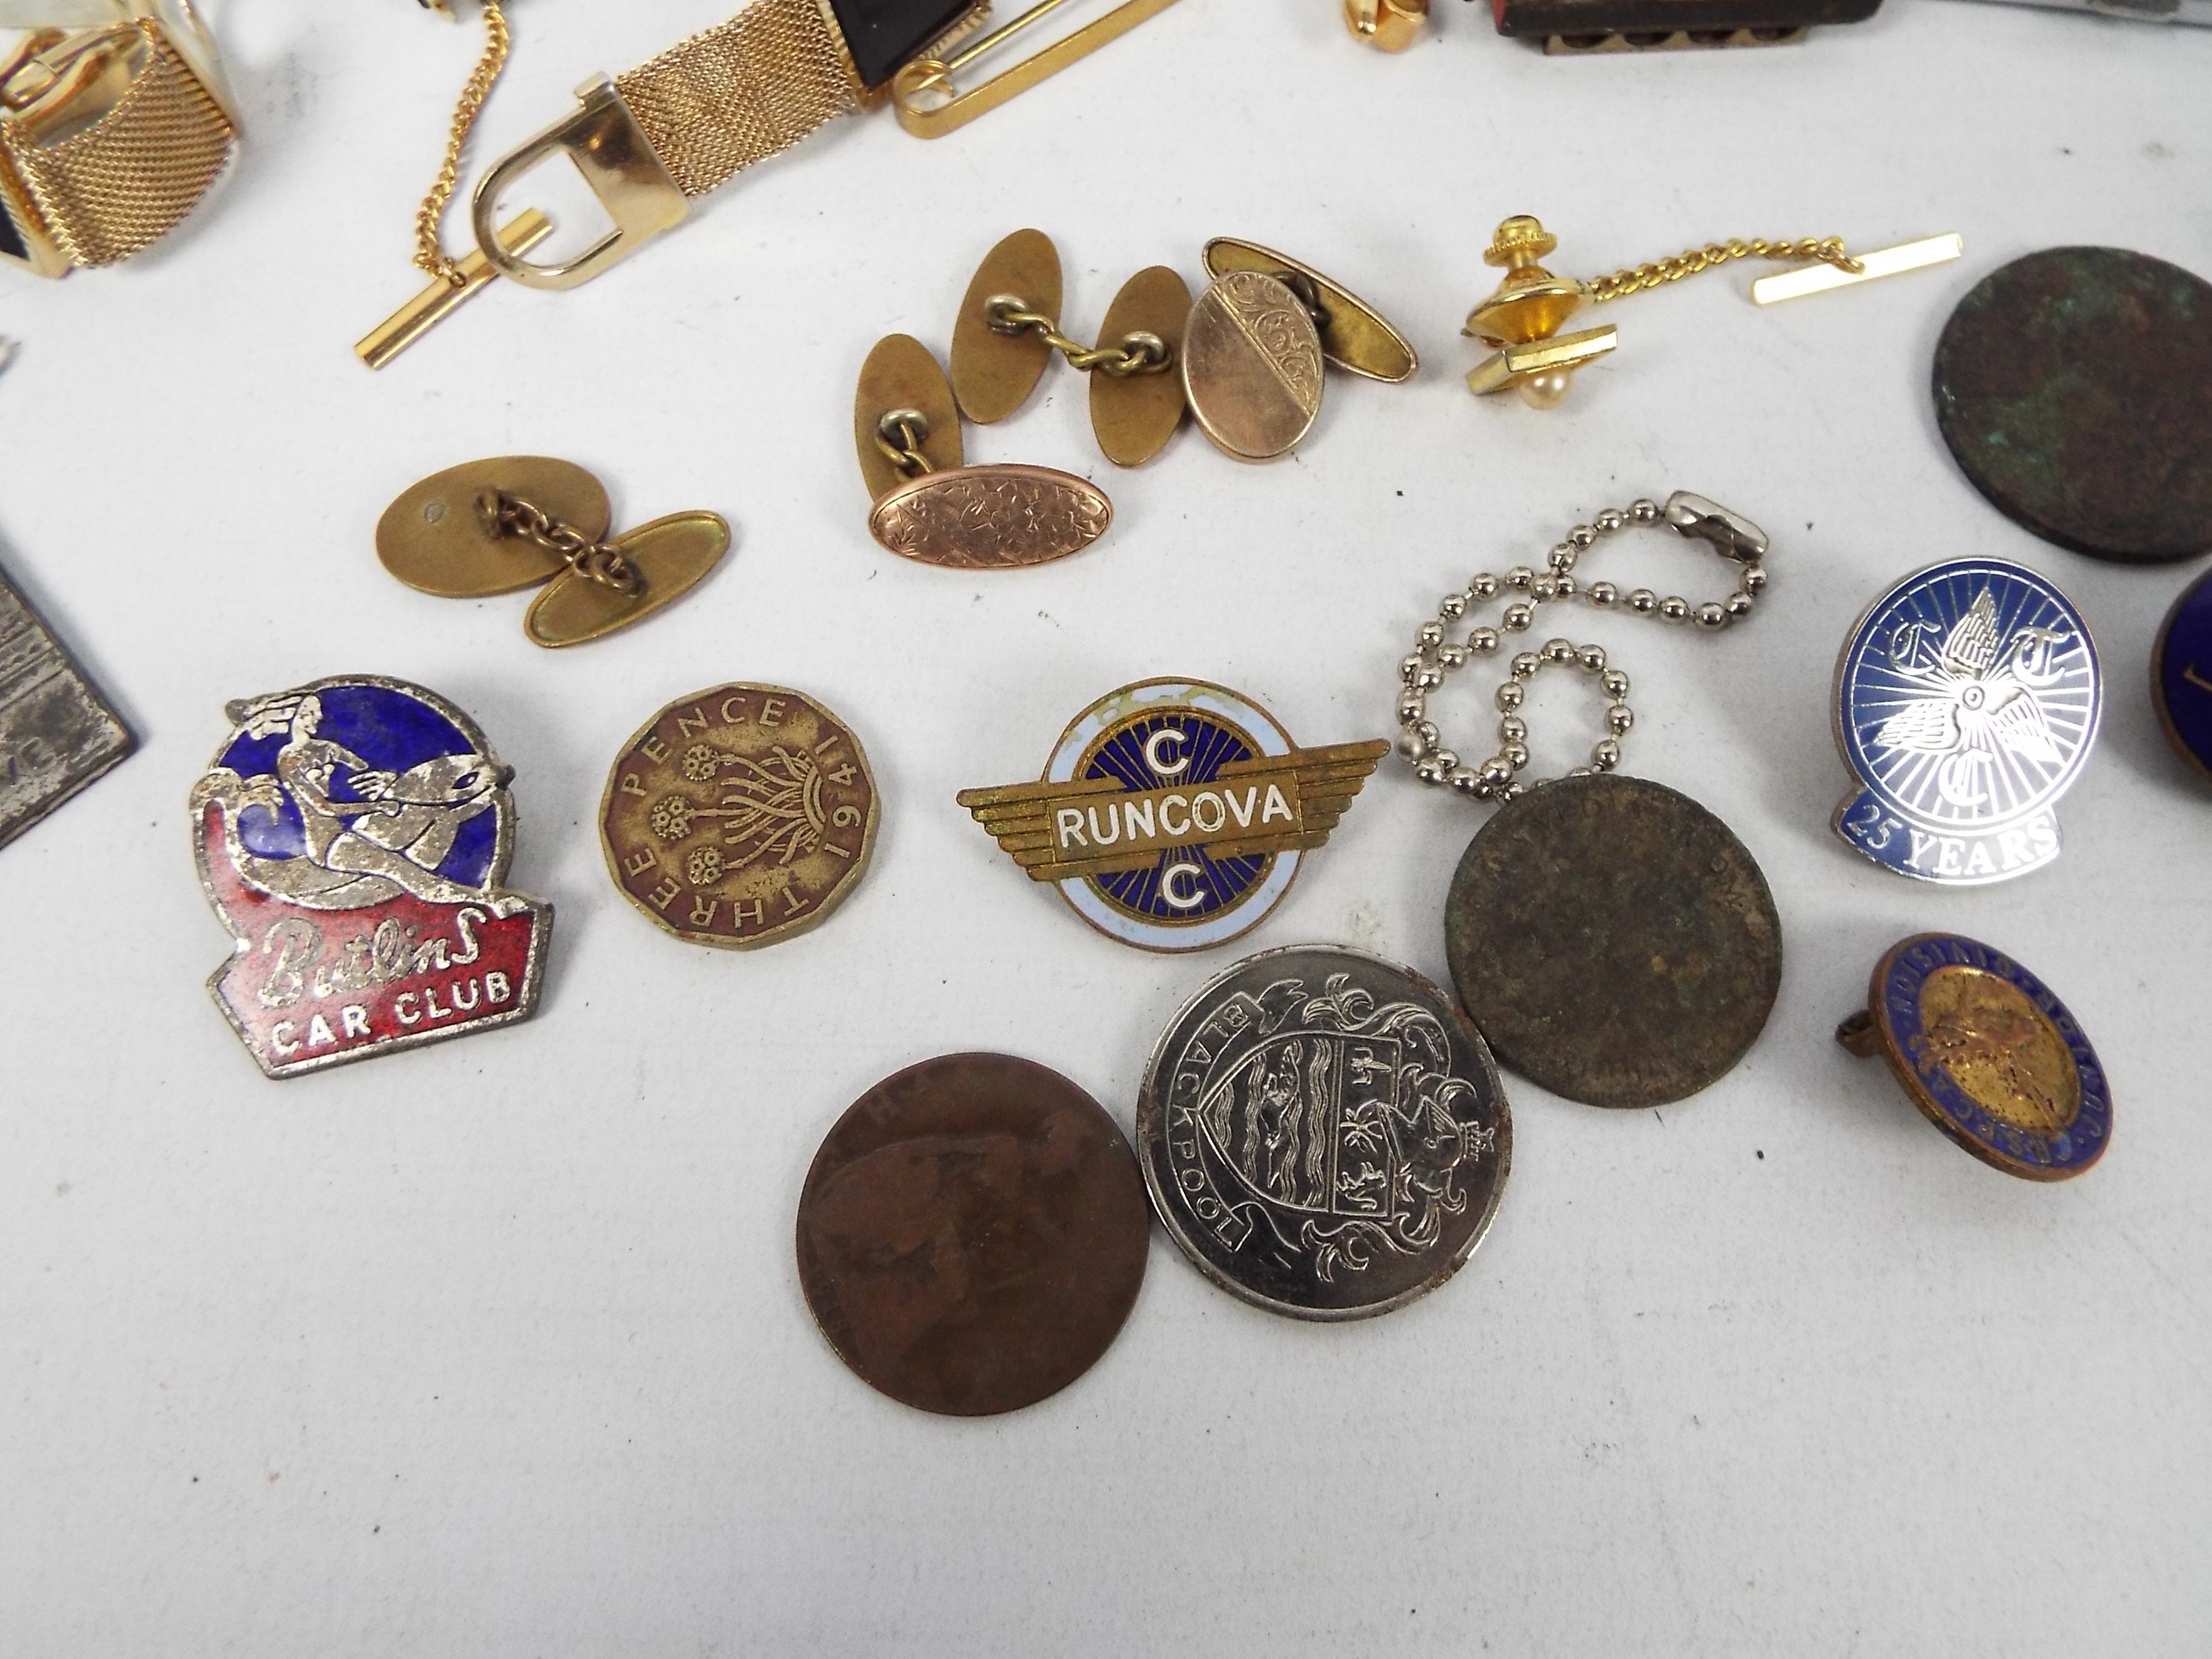 Mixed collectables to include rocking horse model, dress studs, cufflinks, enamel badges, - Image 4 of 5